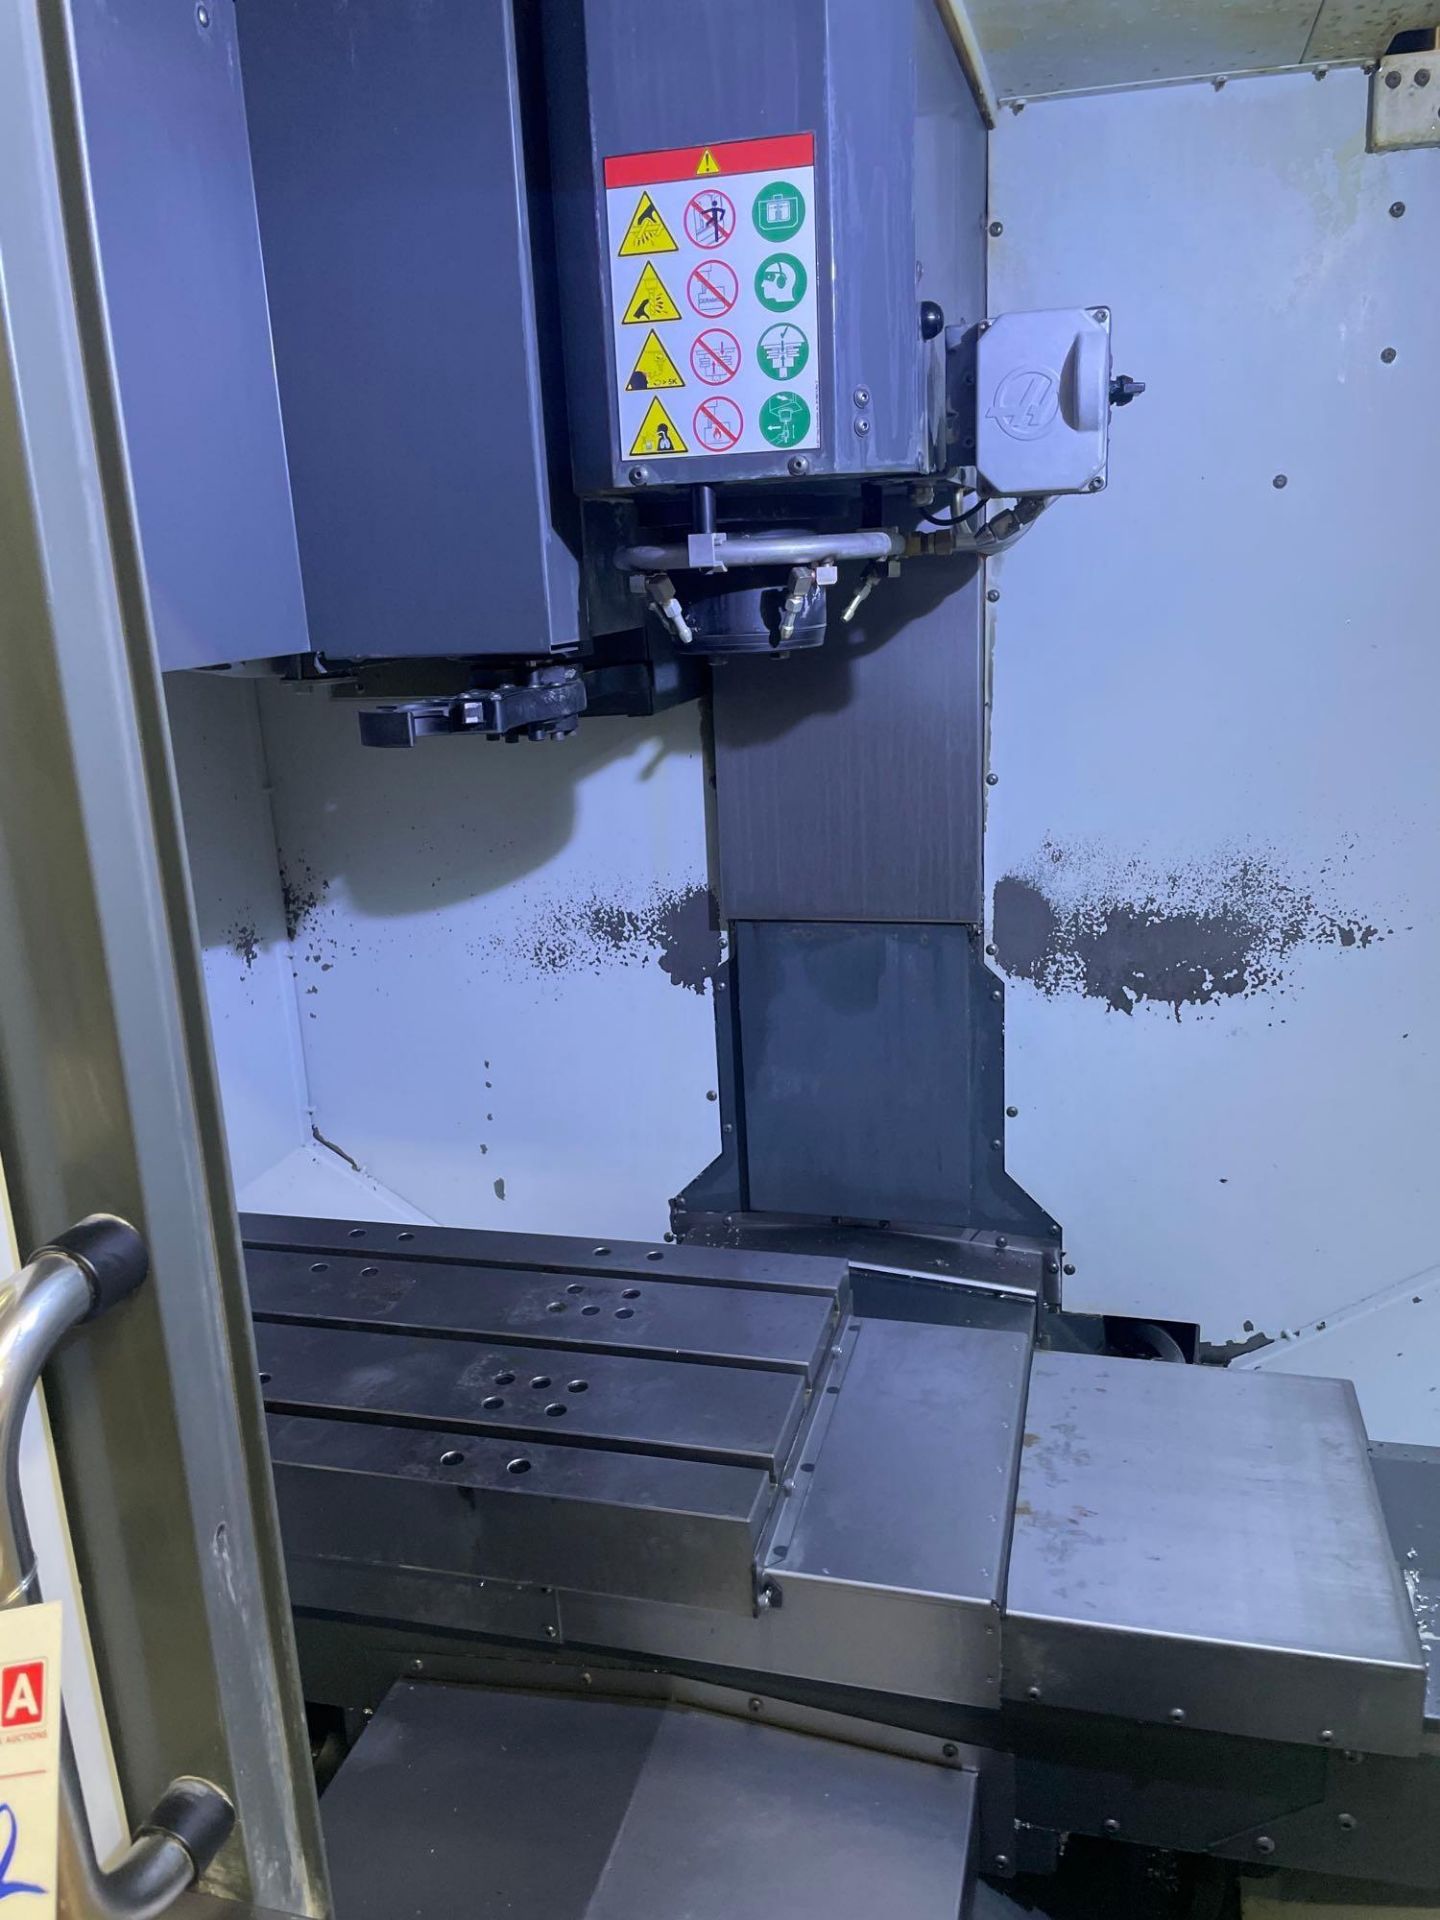 HAAS DM-1 Vertical Machining Center, 4th- Axis Ready, 20” x 16” x 15.5” Trvls., 15k RPM, New 2017 - Image 6 of 12